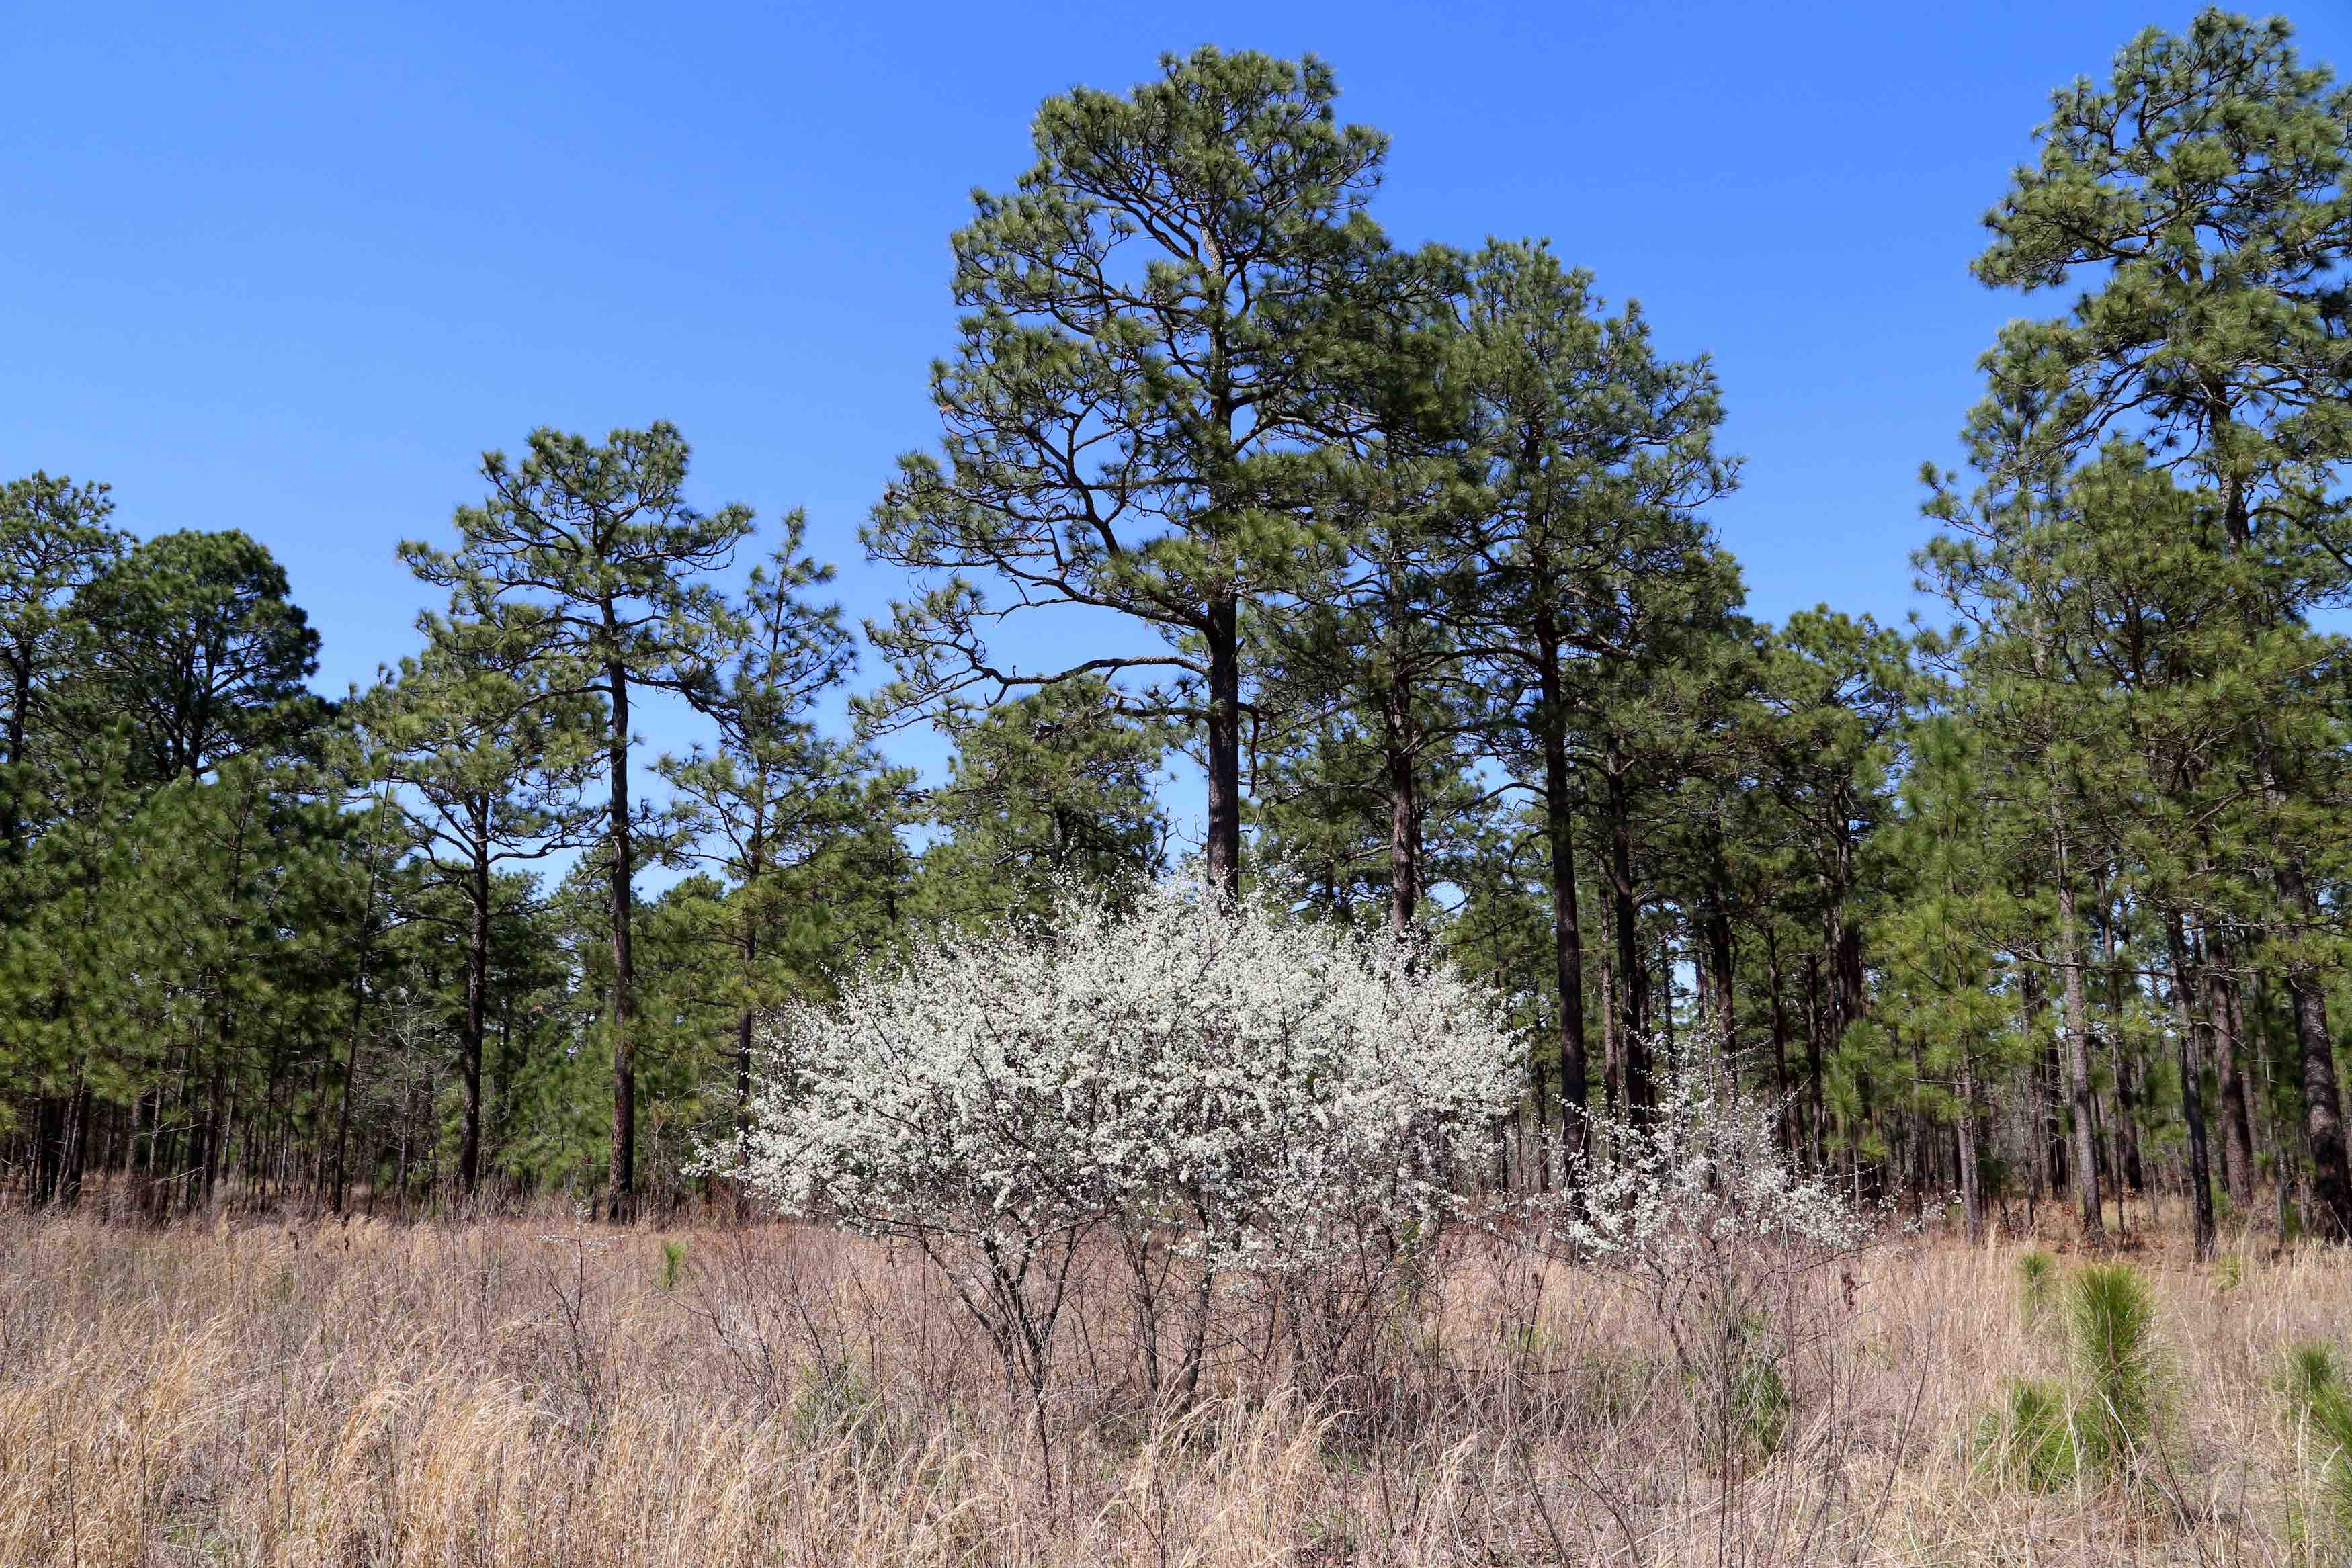 The Scientific Name is Prunus angustifolia. You will likely hear them called Chickasaw Plum. This picture shows the Chickasaw Plums are in full bloom before leaves emerge.  More shrub than tree, they prefer full sun in managed fields in the sandhills in March. of Prunus angustifolia